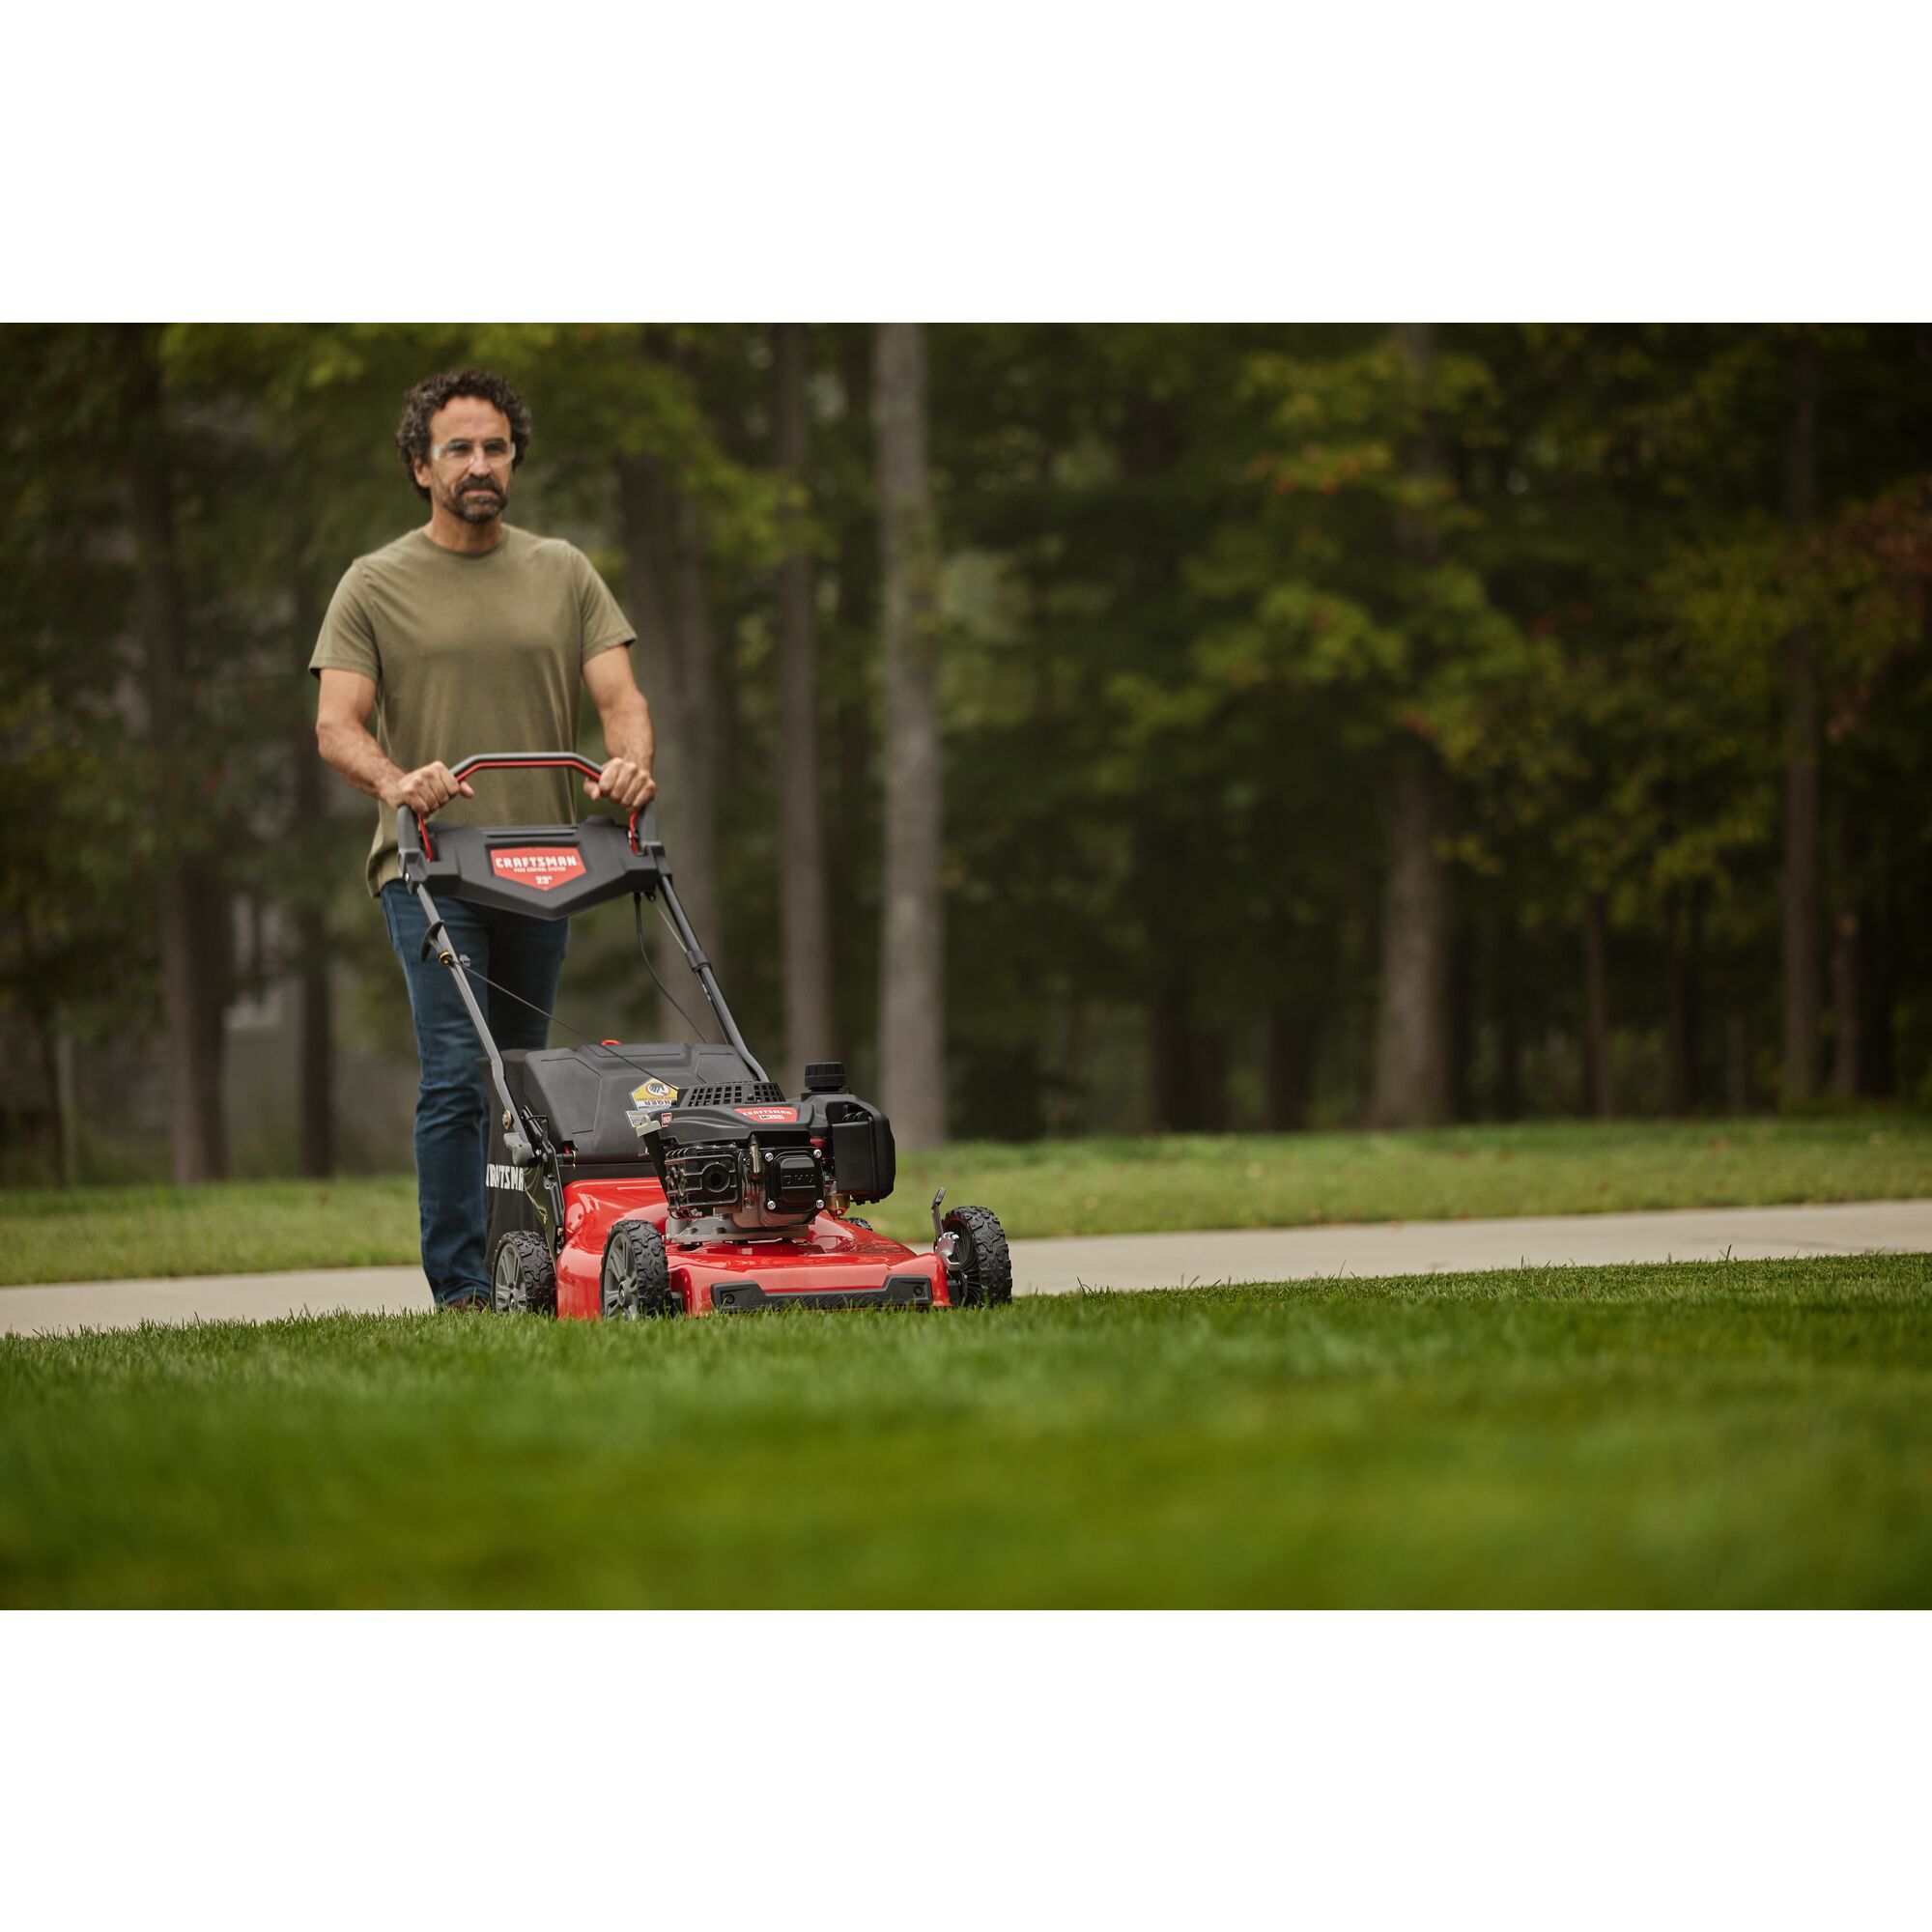 CRAFTSMAN M355 Self Propelled Lawn Mower in front view mowing a wooded lawn with green shirt